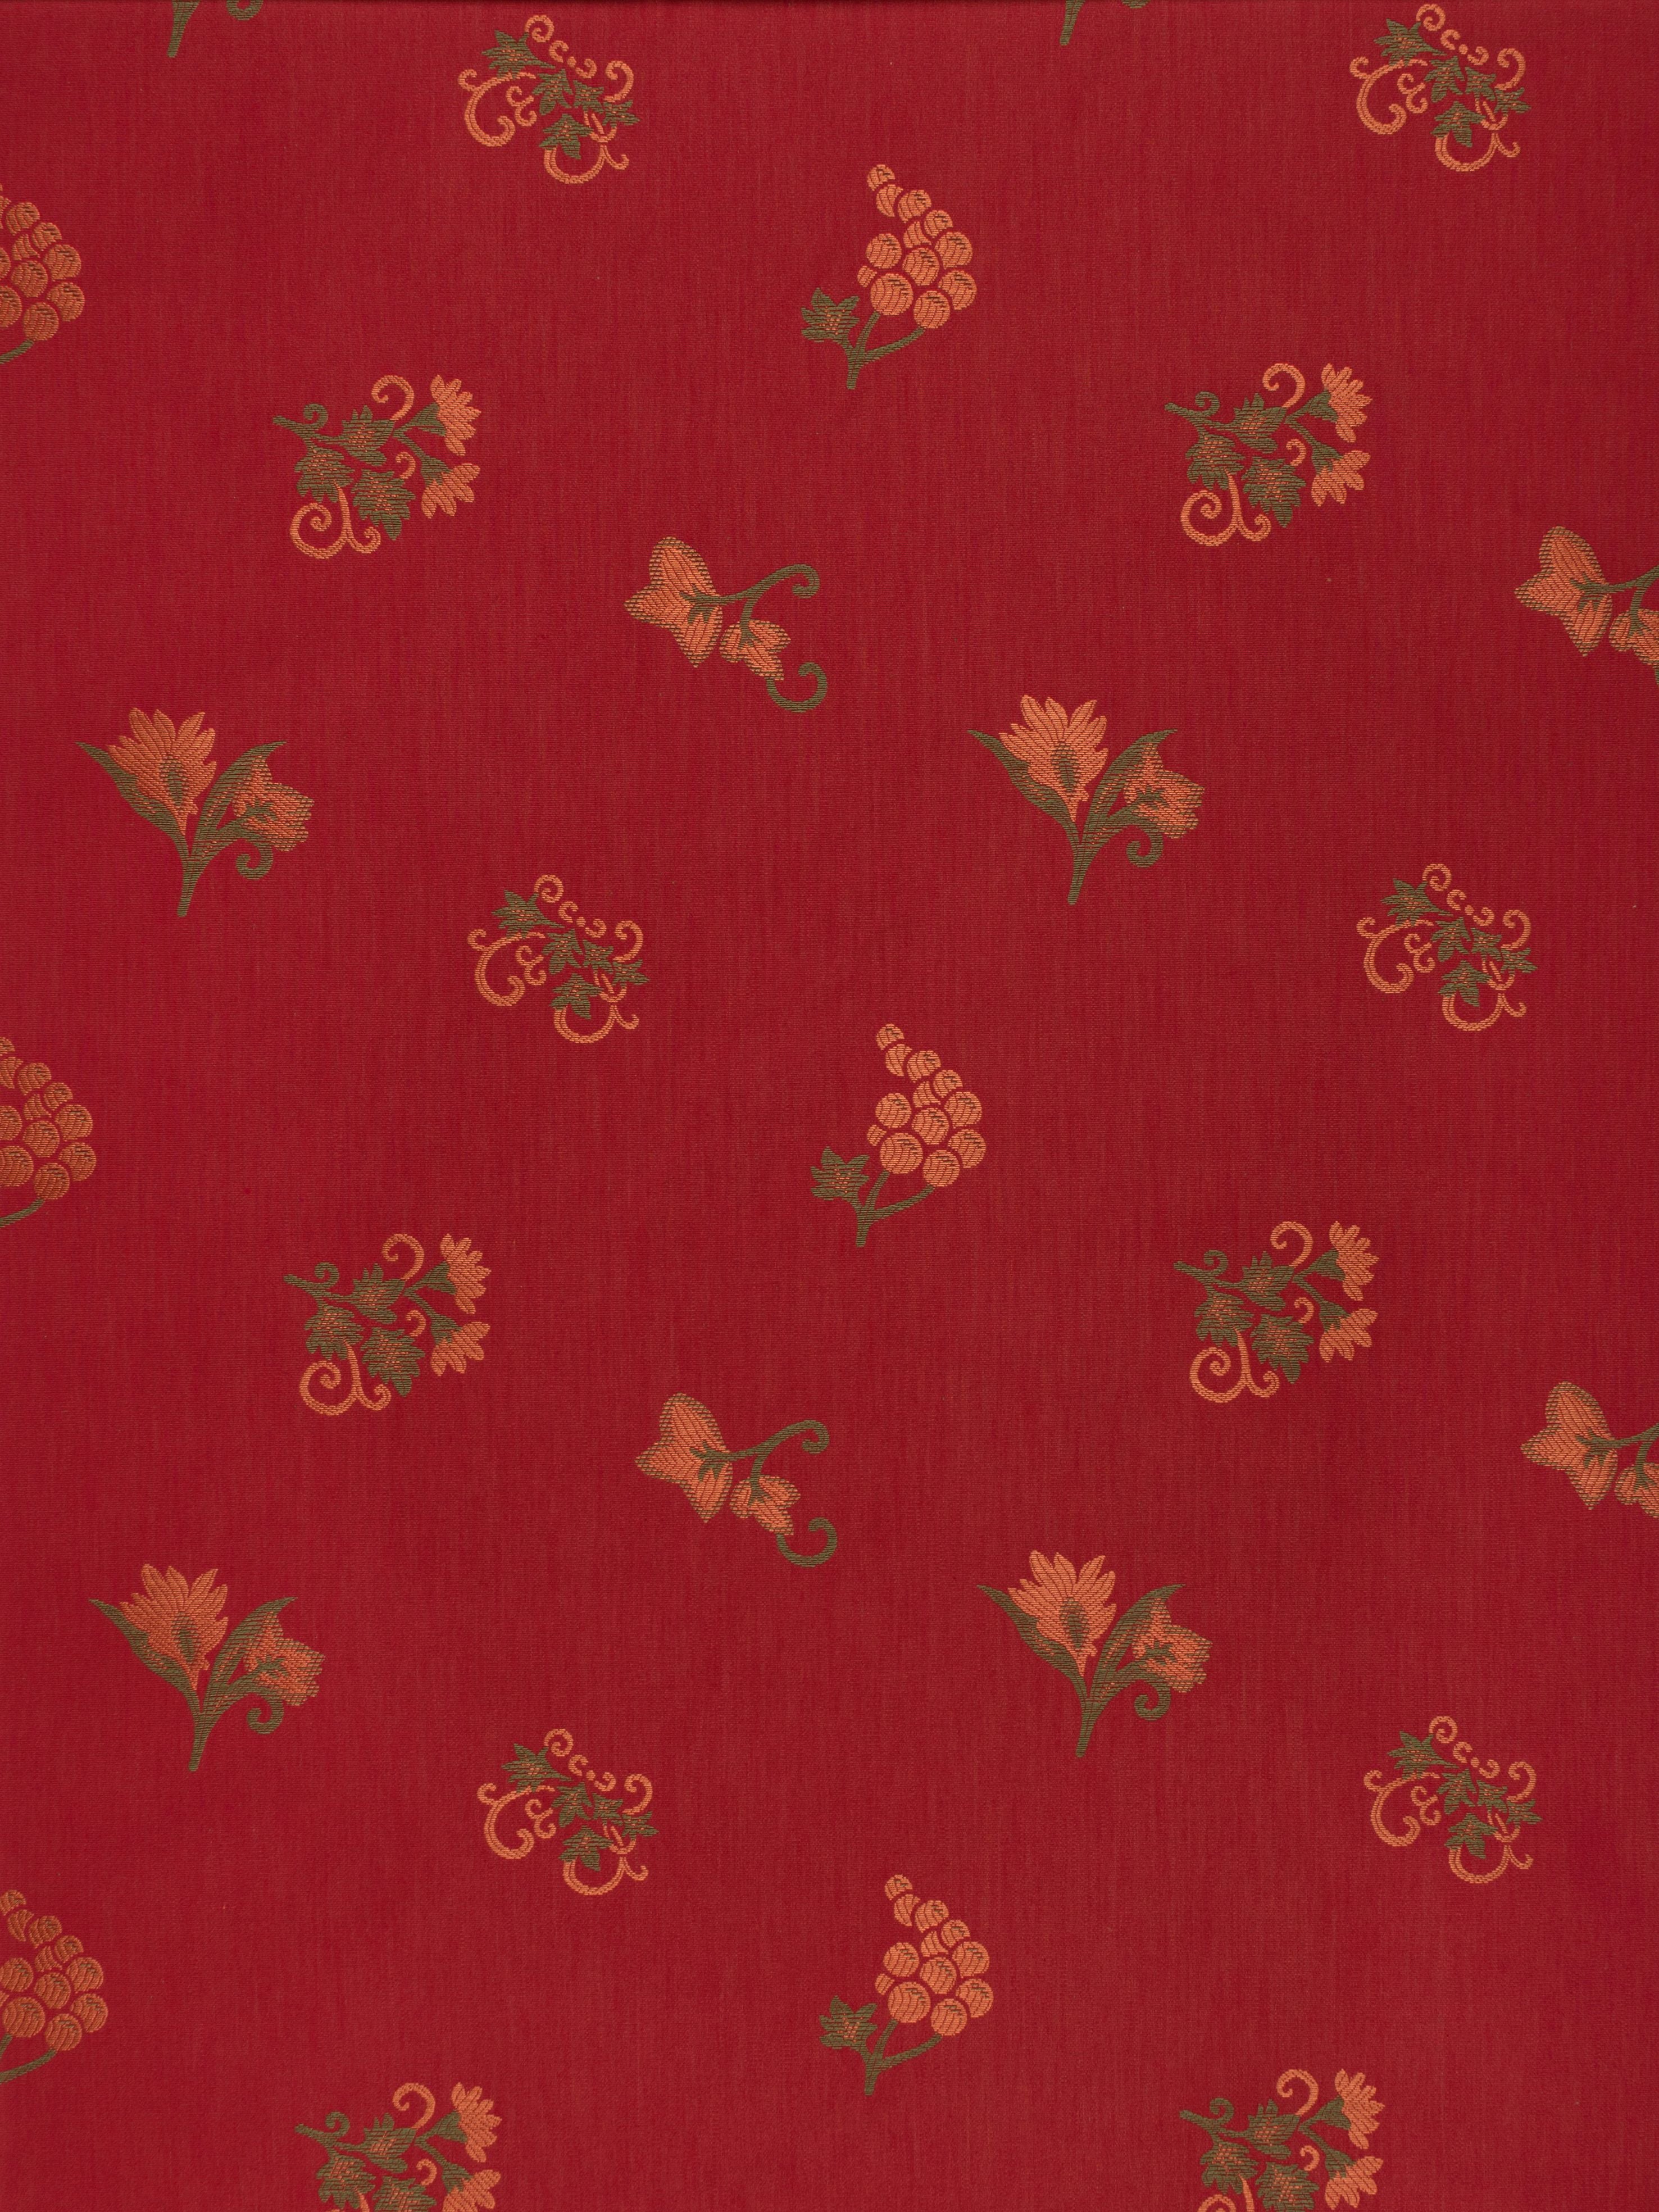 Samarcanda Fiori fabric in red color - pattern number M0 00041348 - by Scalamandre in the Old World Weavers collection